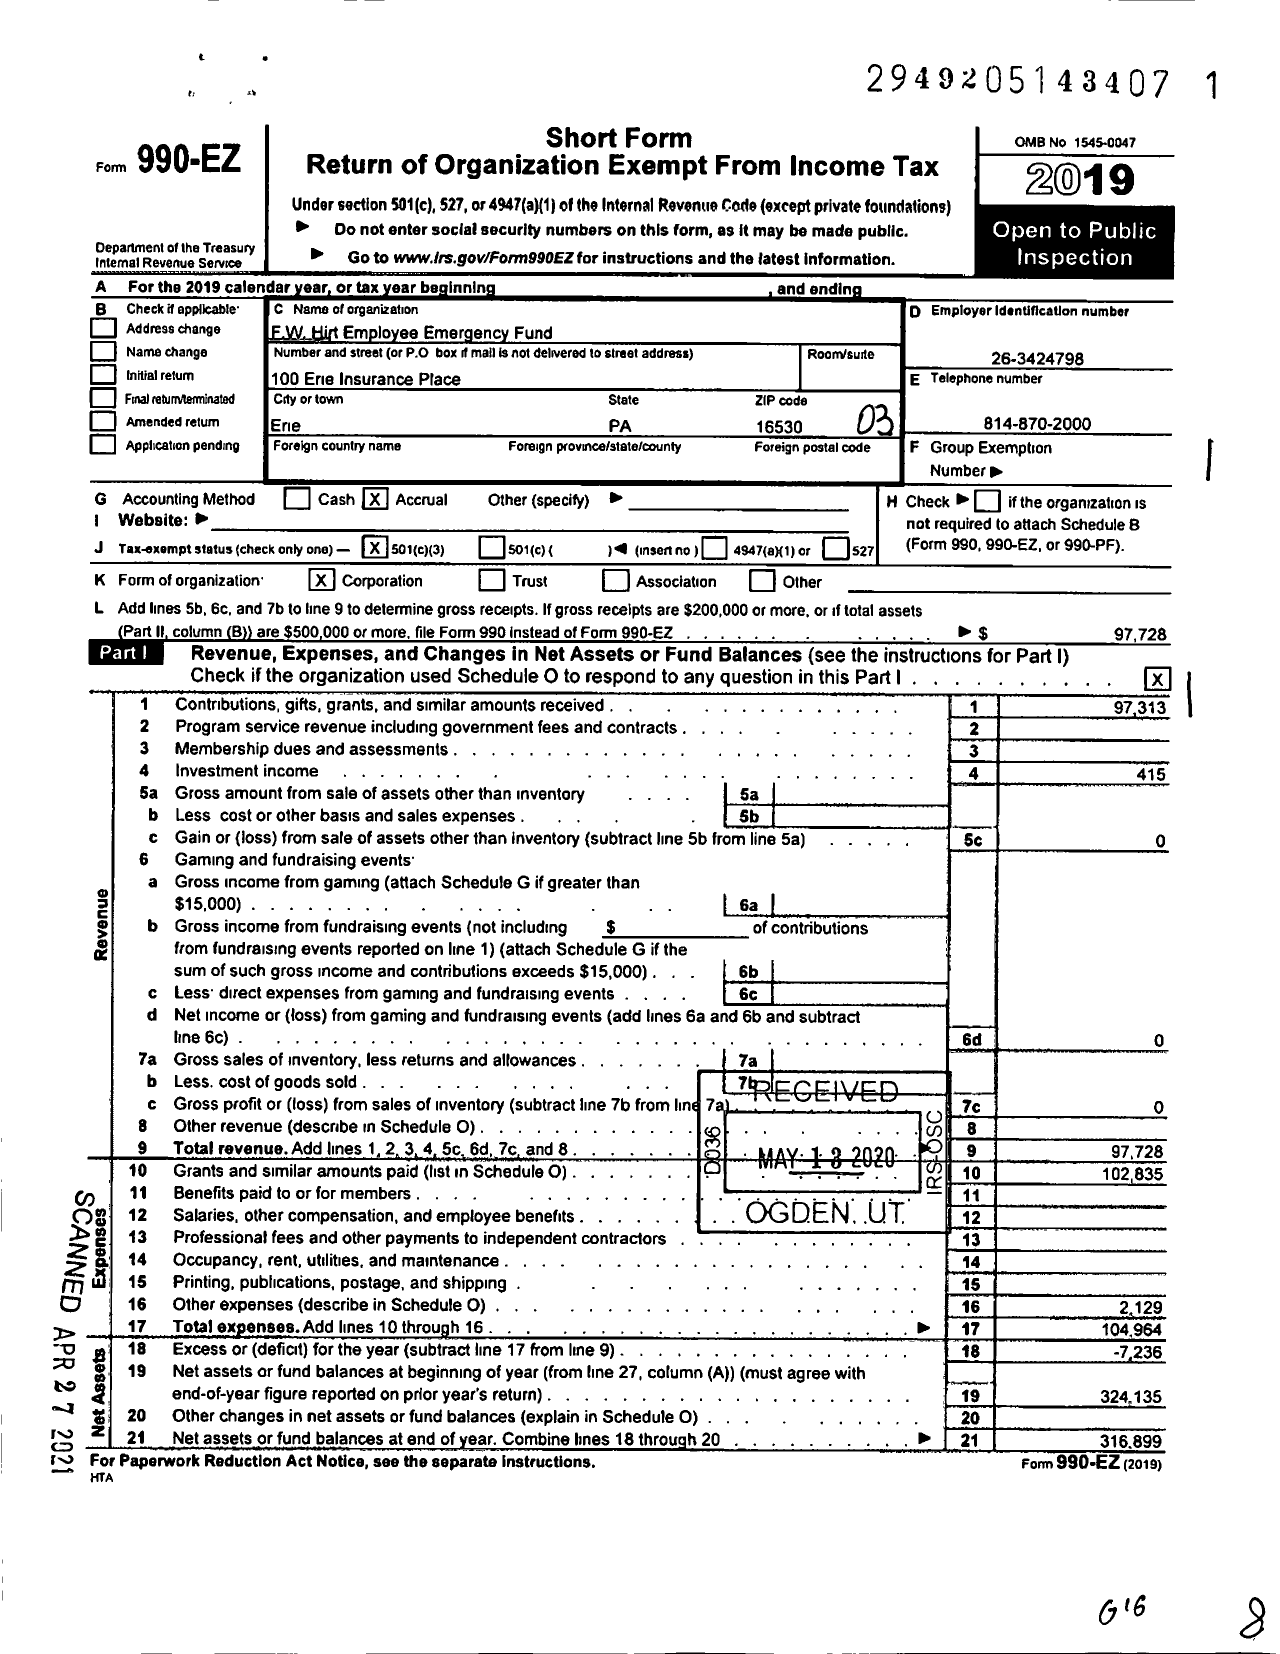 Image of first page of 2019 Form 990EZ for F W Hirt Employee Emergency Fund